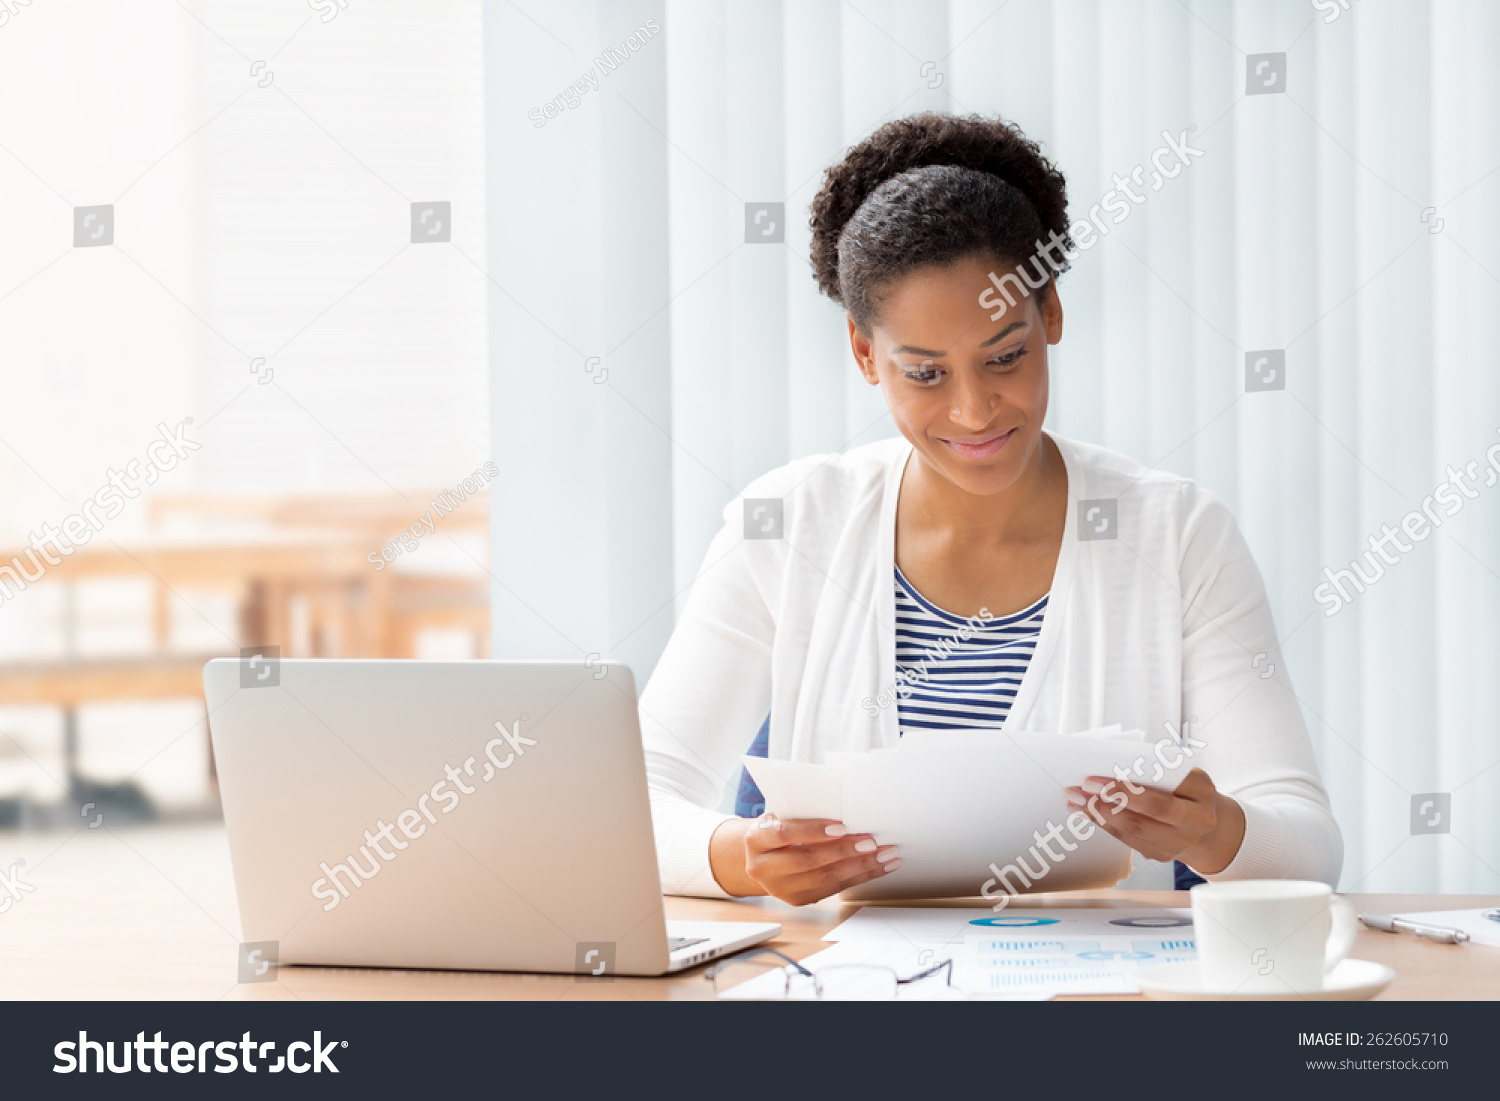 Businessowman working with papers in office #262605710